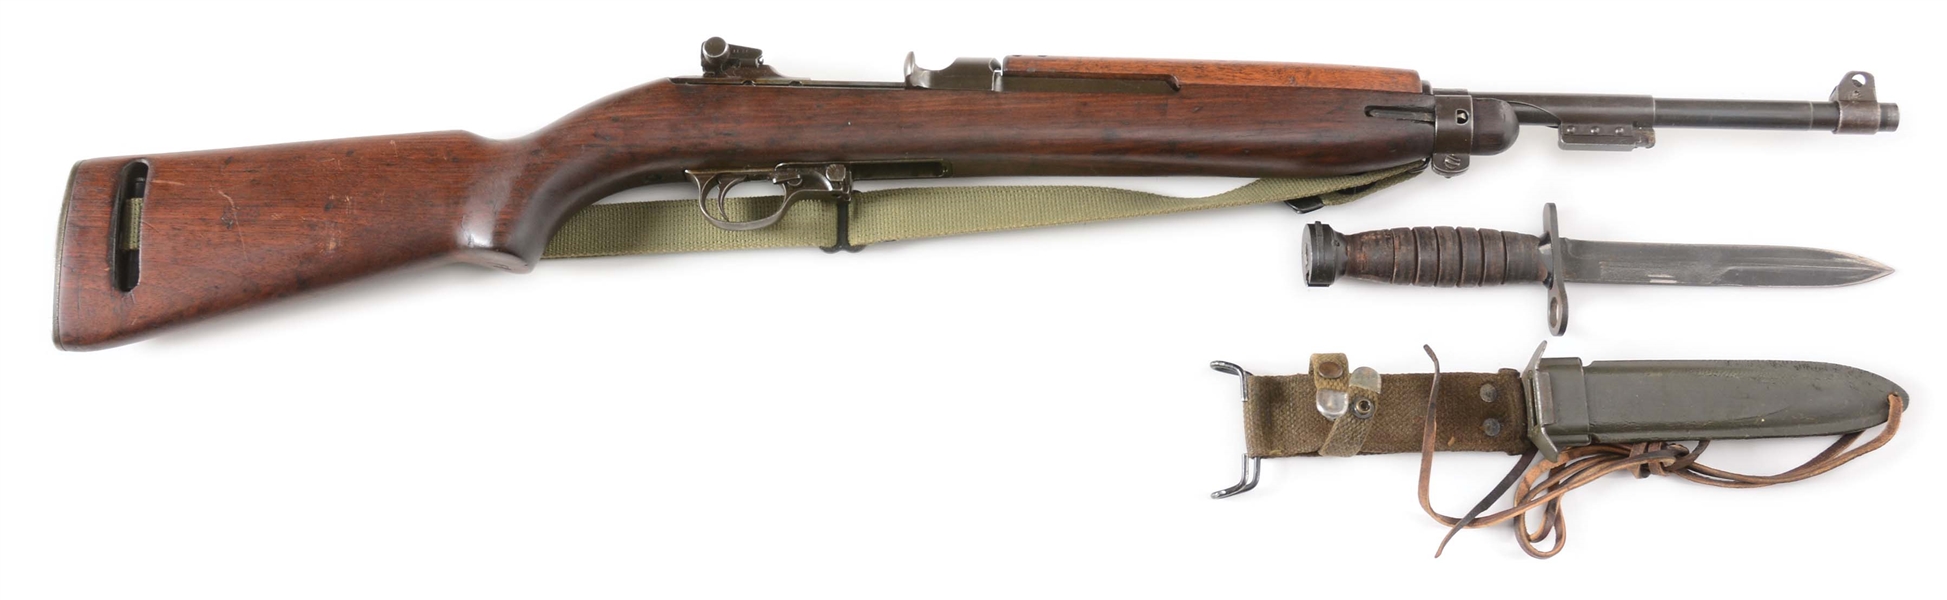 (C) WINCHESTER M1 CARBINE SEMI-AUTOMATIC RIFLE USED BY ISRAEL.